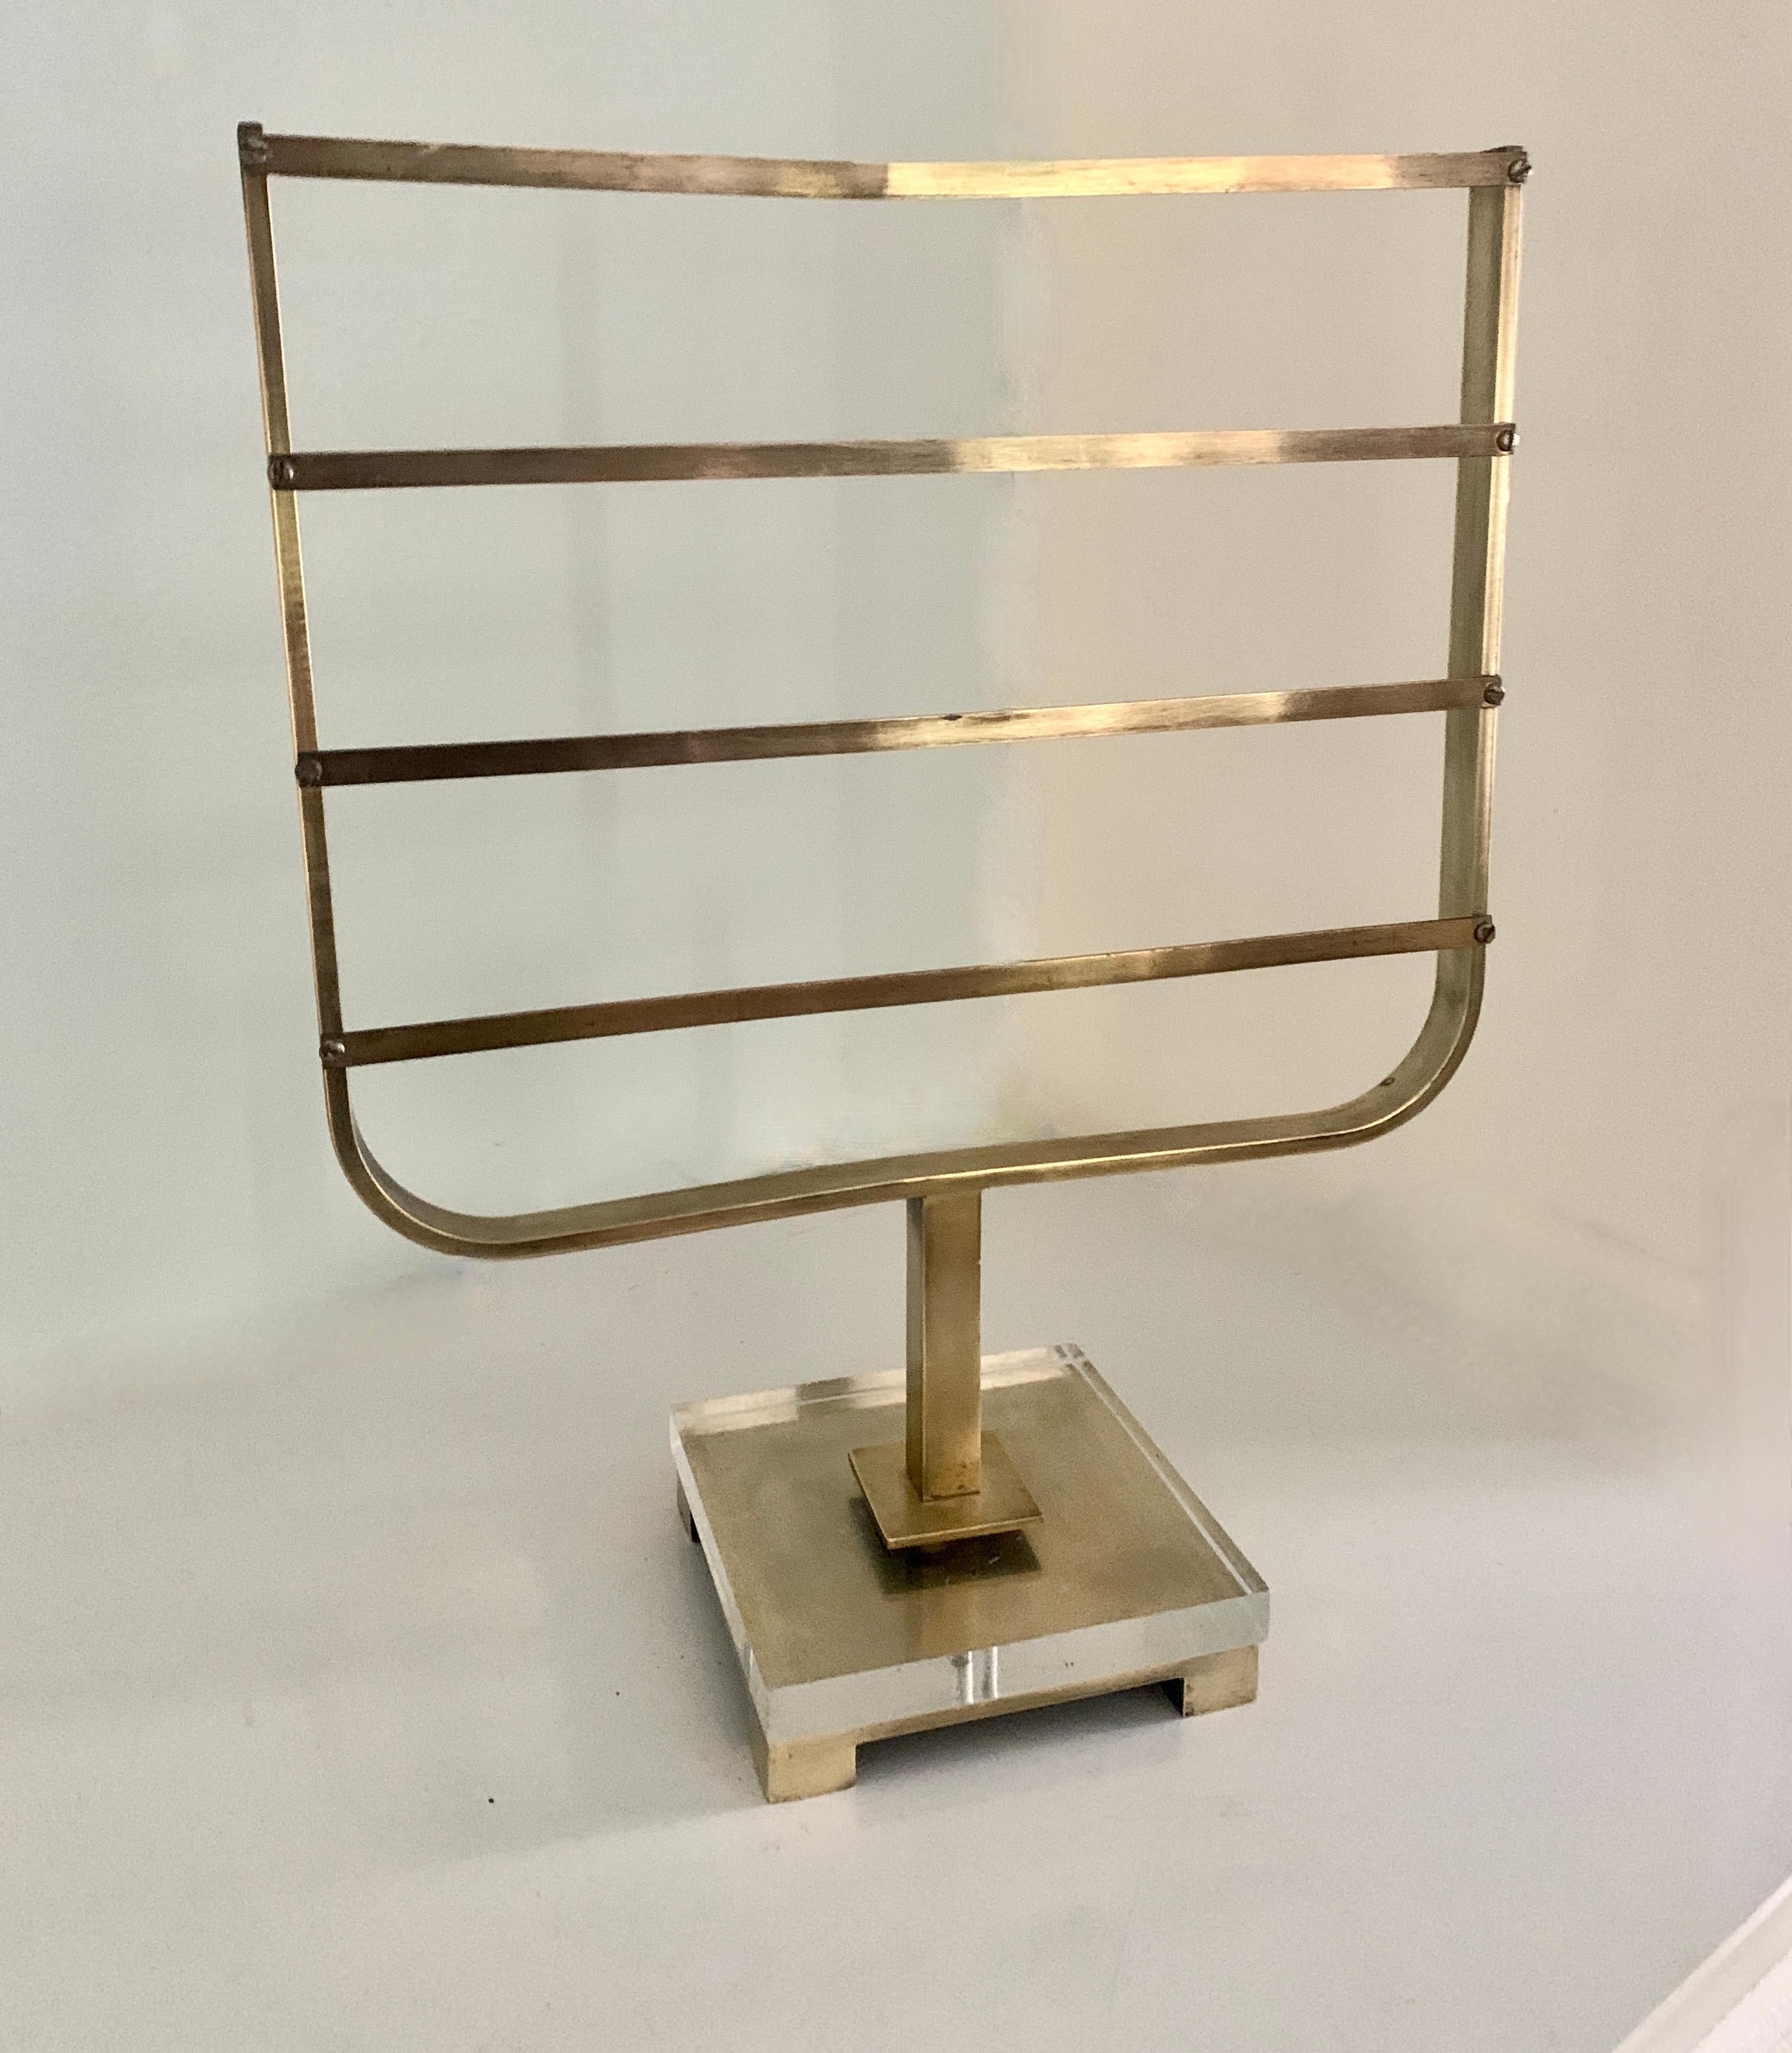 A Brass Jewelry or Scarf holder. The Base is acrylic and brass with ladder style holder that works for many items, from assorted jewelry, earrings, necklaces, scarves and ties. Reminiscent of other stands and mirrors by Charles Hollis Jones iconic